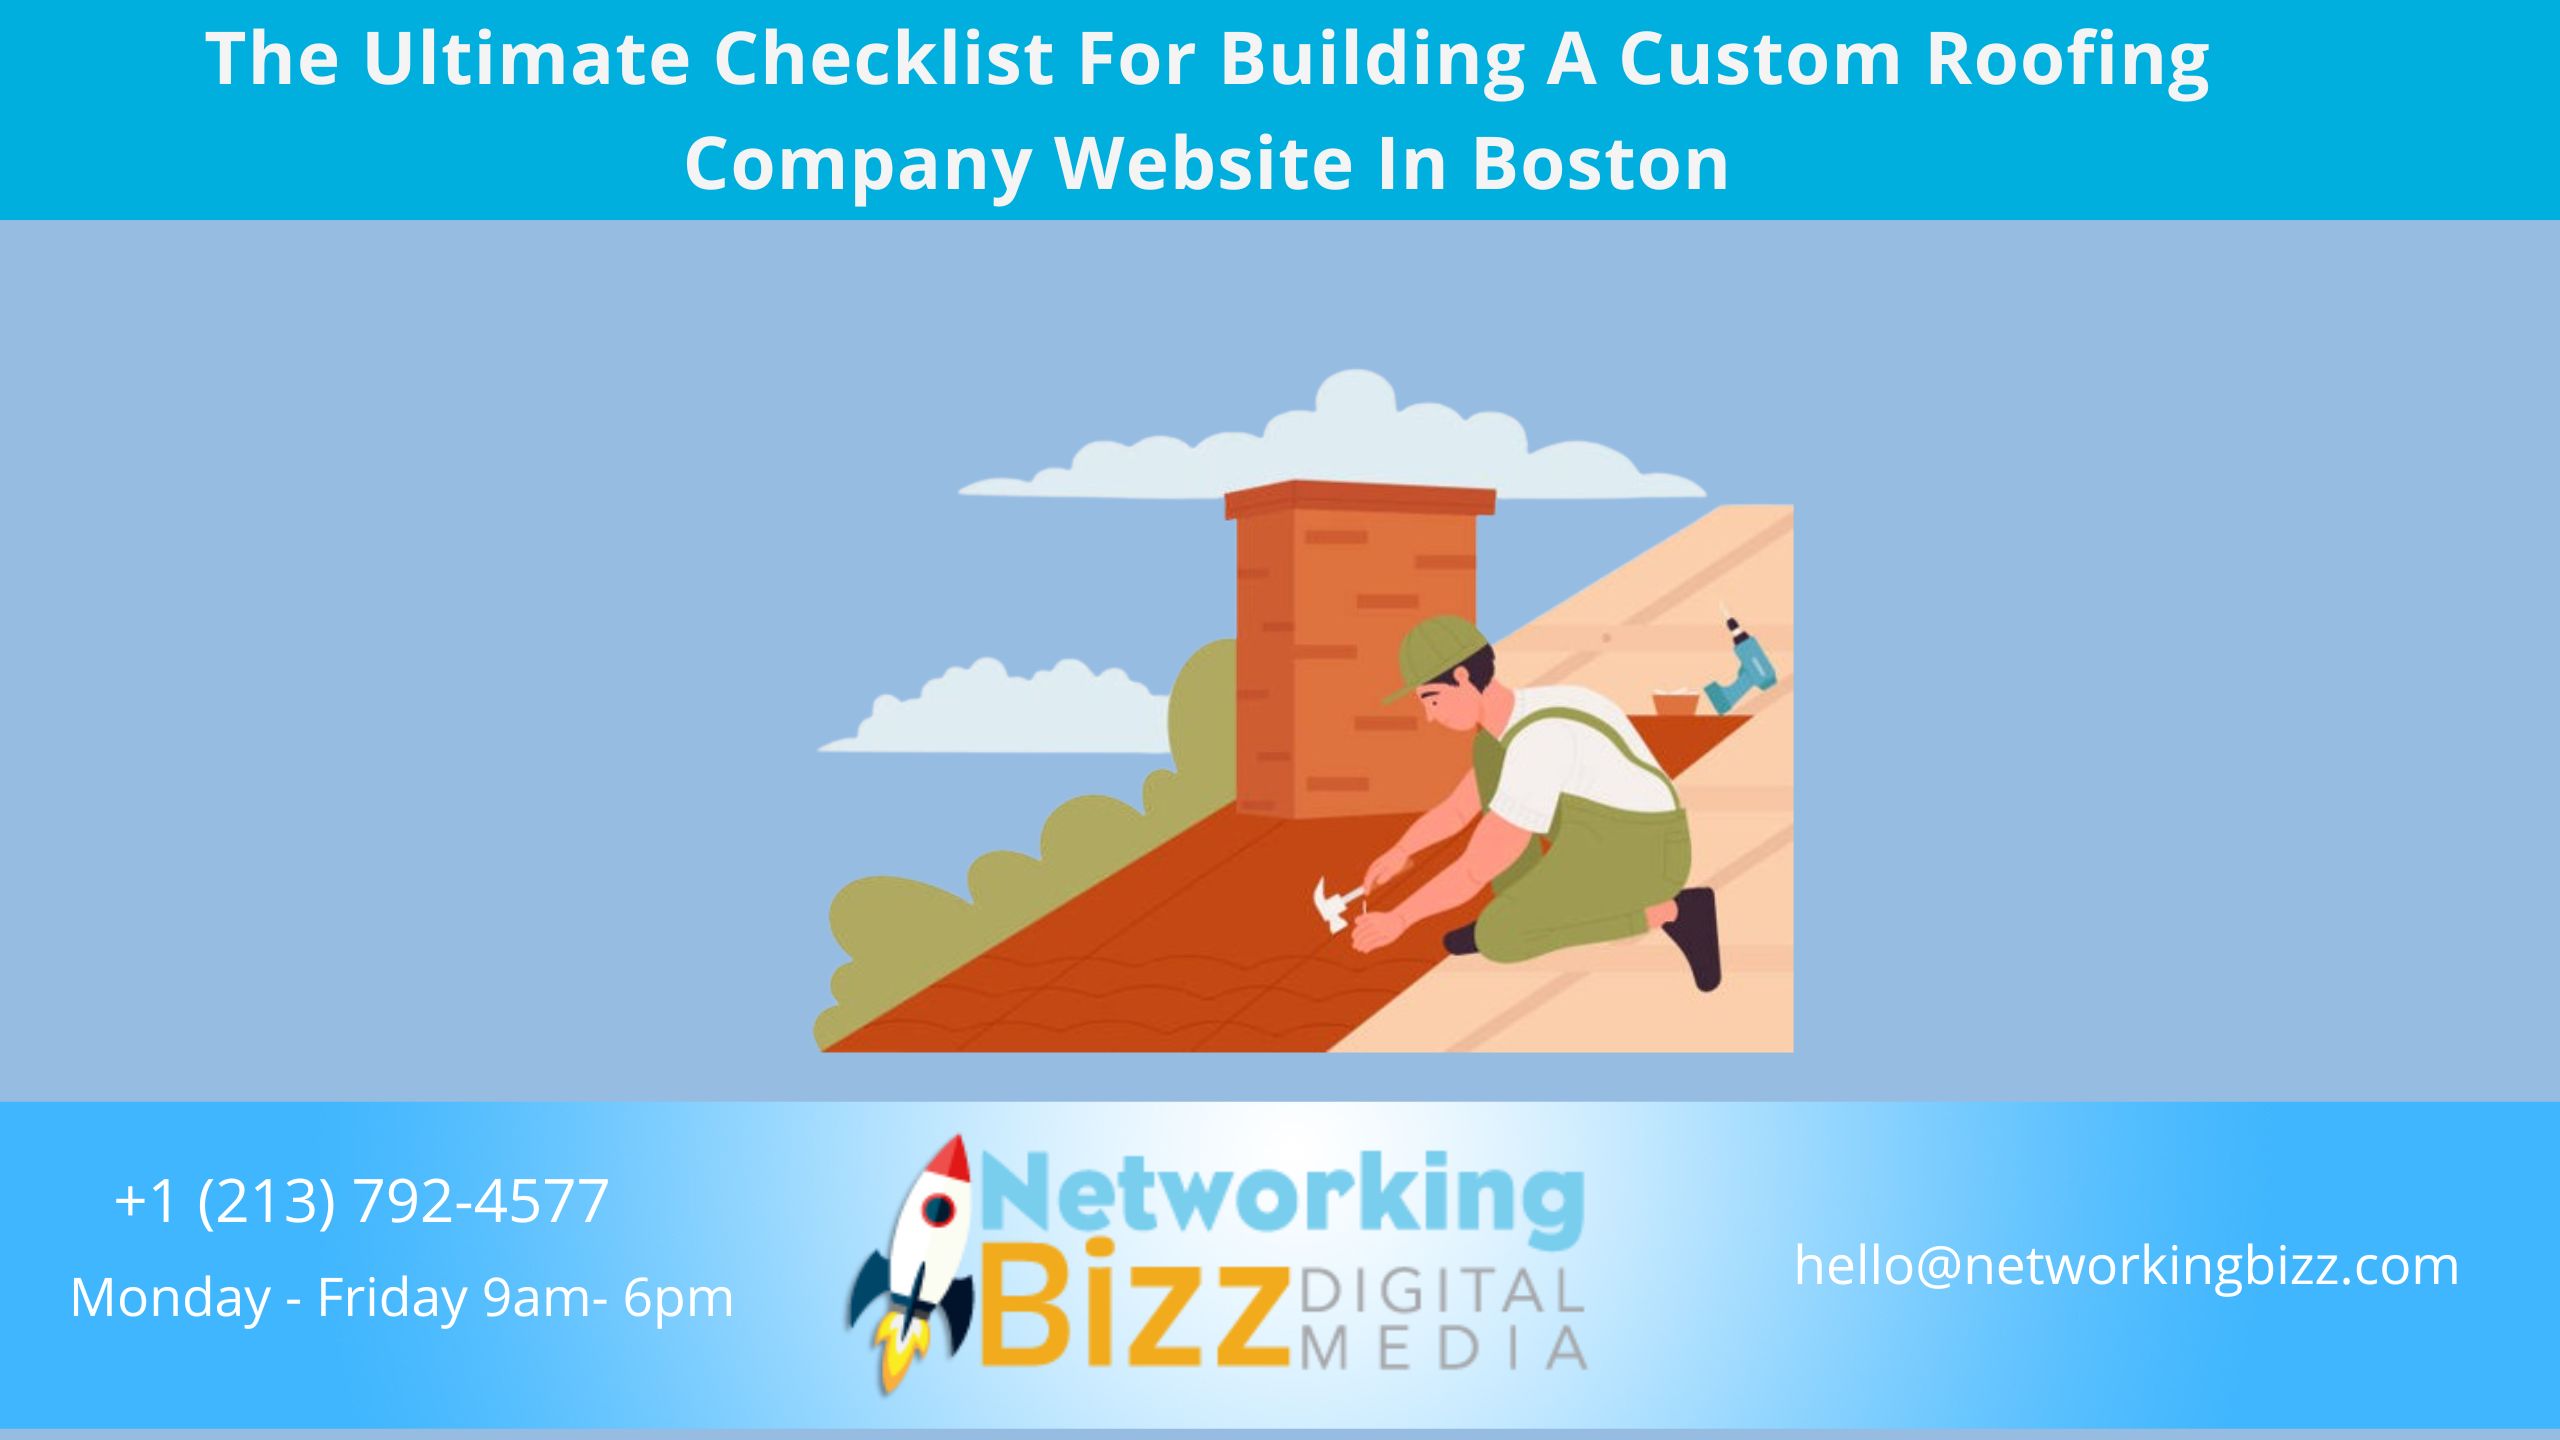 The Ultimate Checklist For Building A Custom Roofing Company Website In Boston